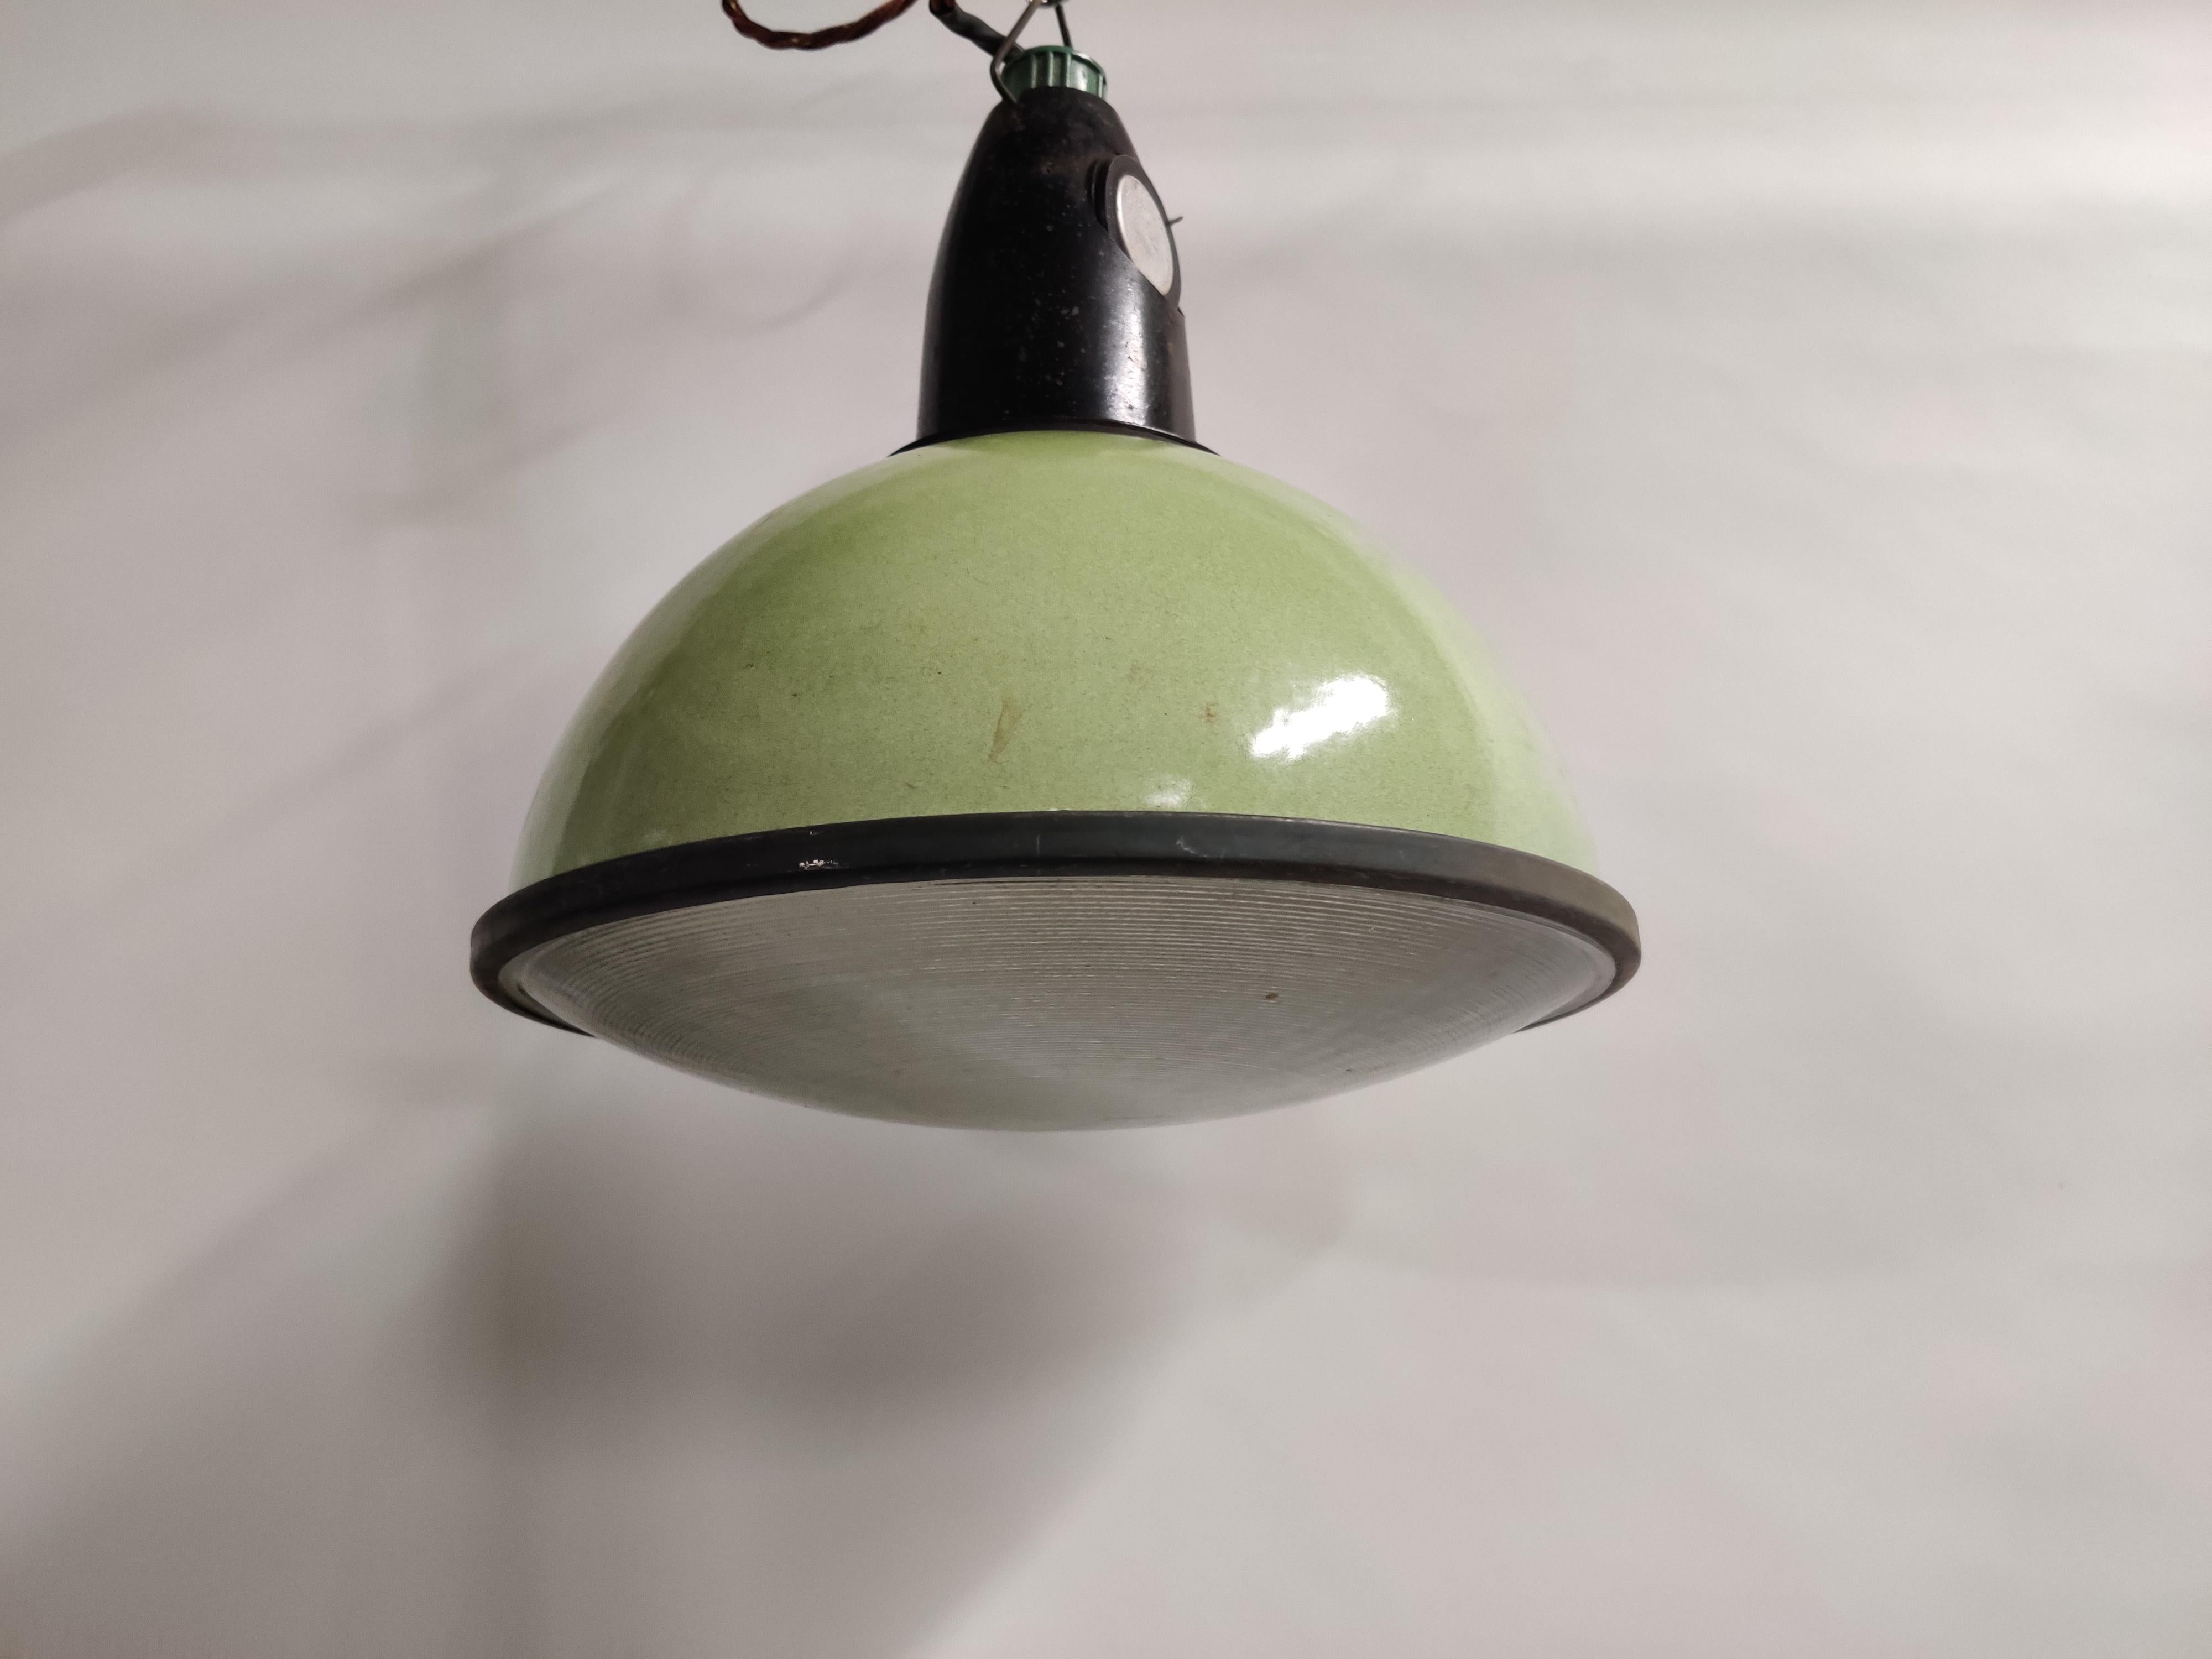 Vintage green enamel pendant lights with glass produced and used in the former USSR factories.

These mint green examples are in very good condition and come with a bakelite shade holder.

This type of lamps looks great in restaurants, bars,